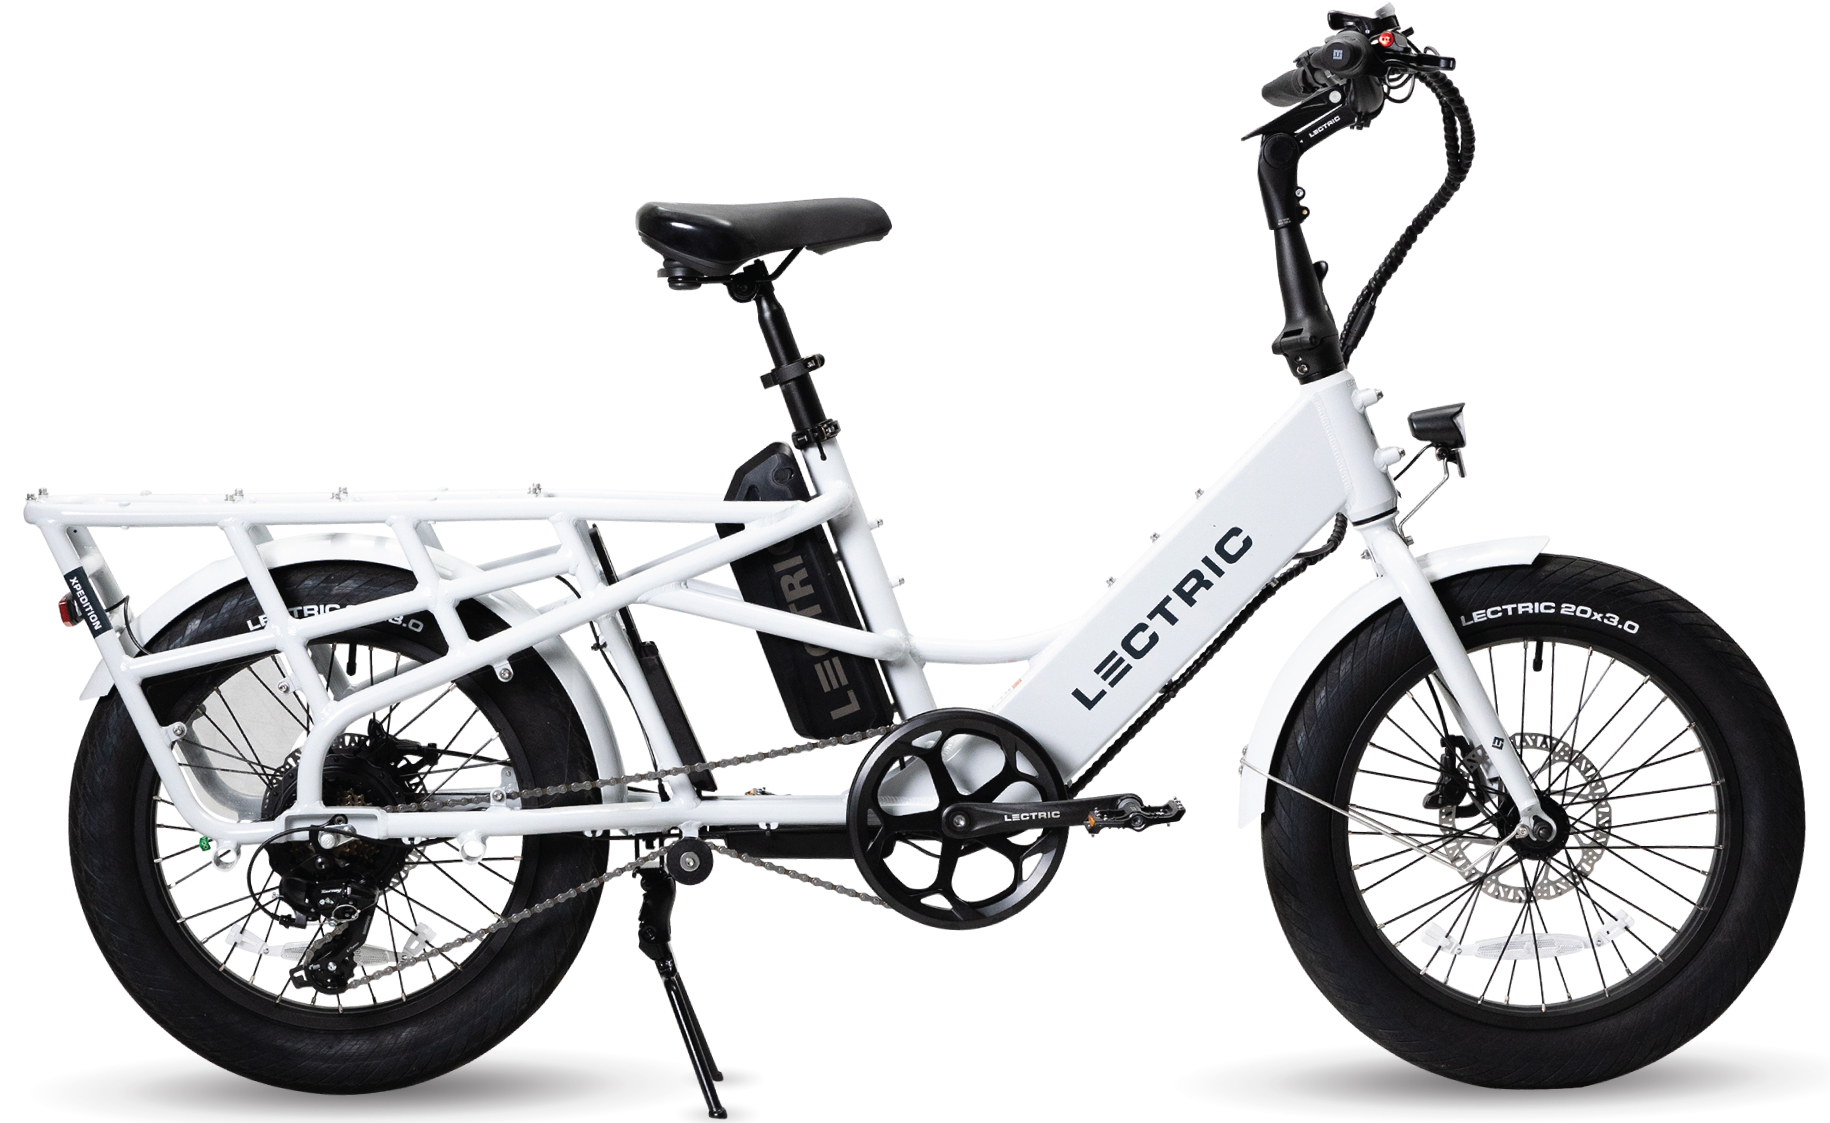 A Lectric brand electric bicycle